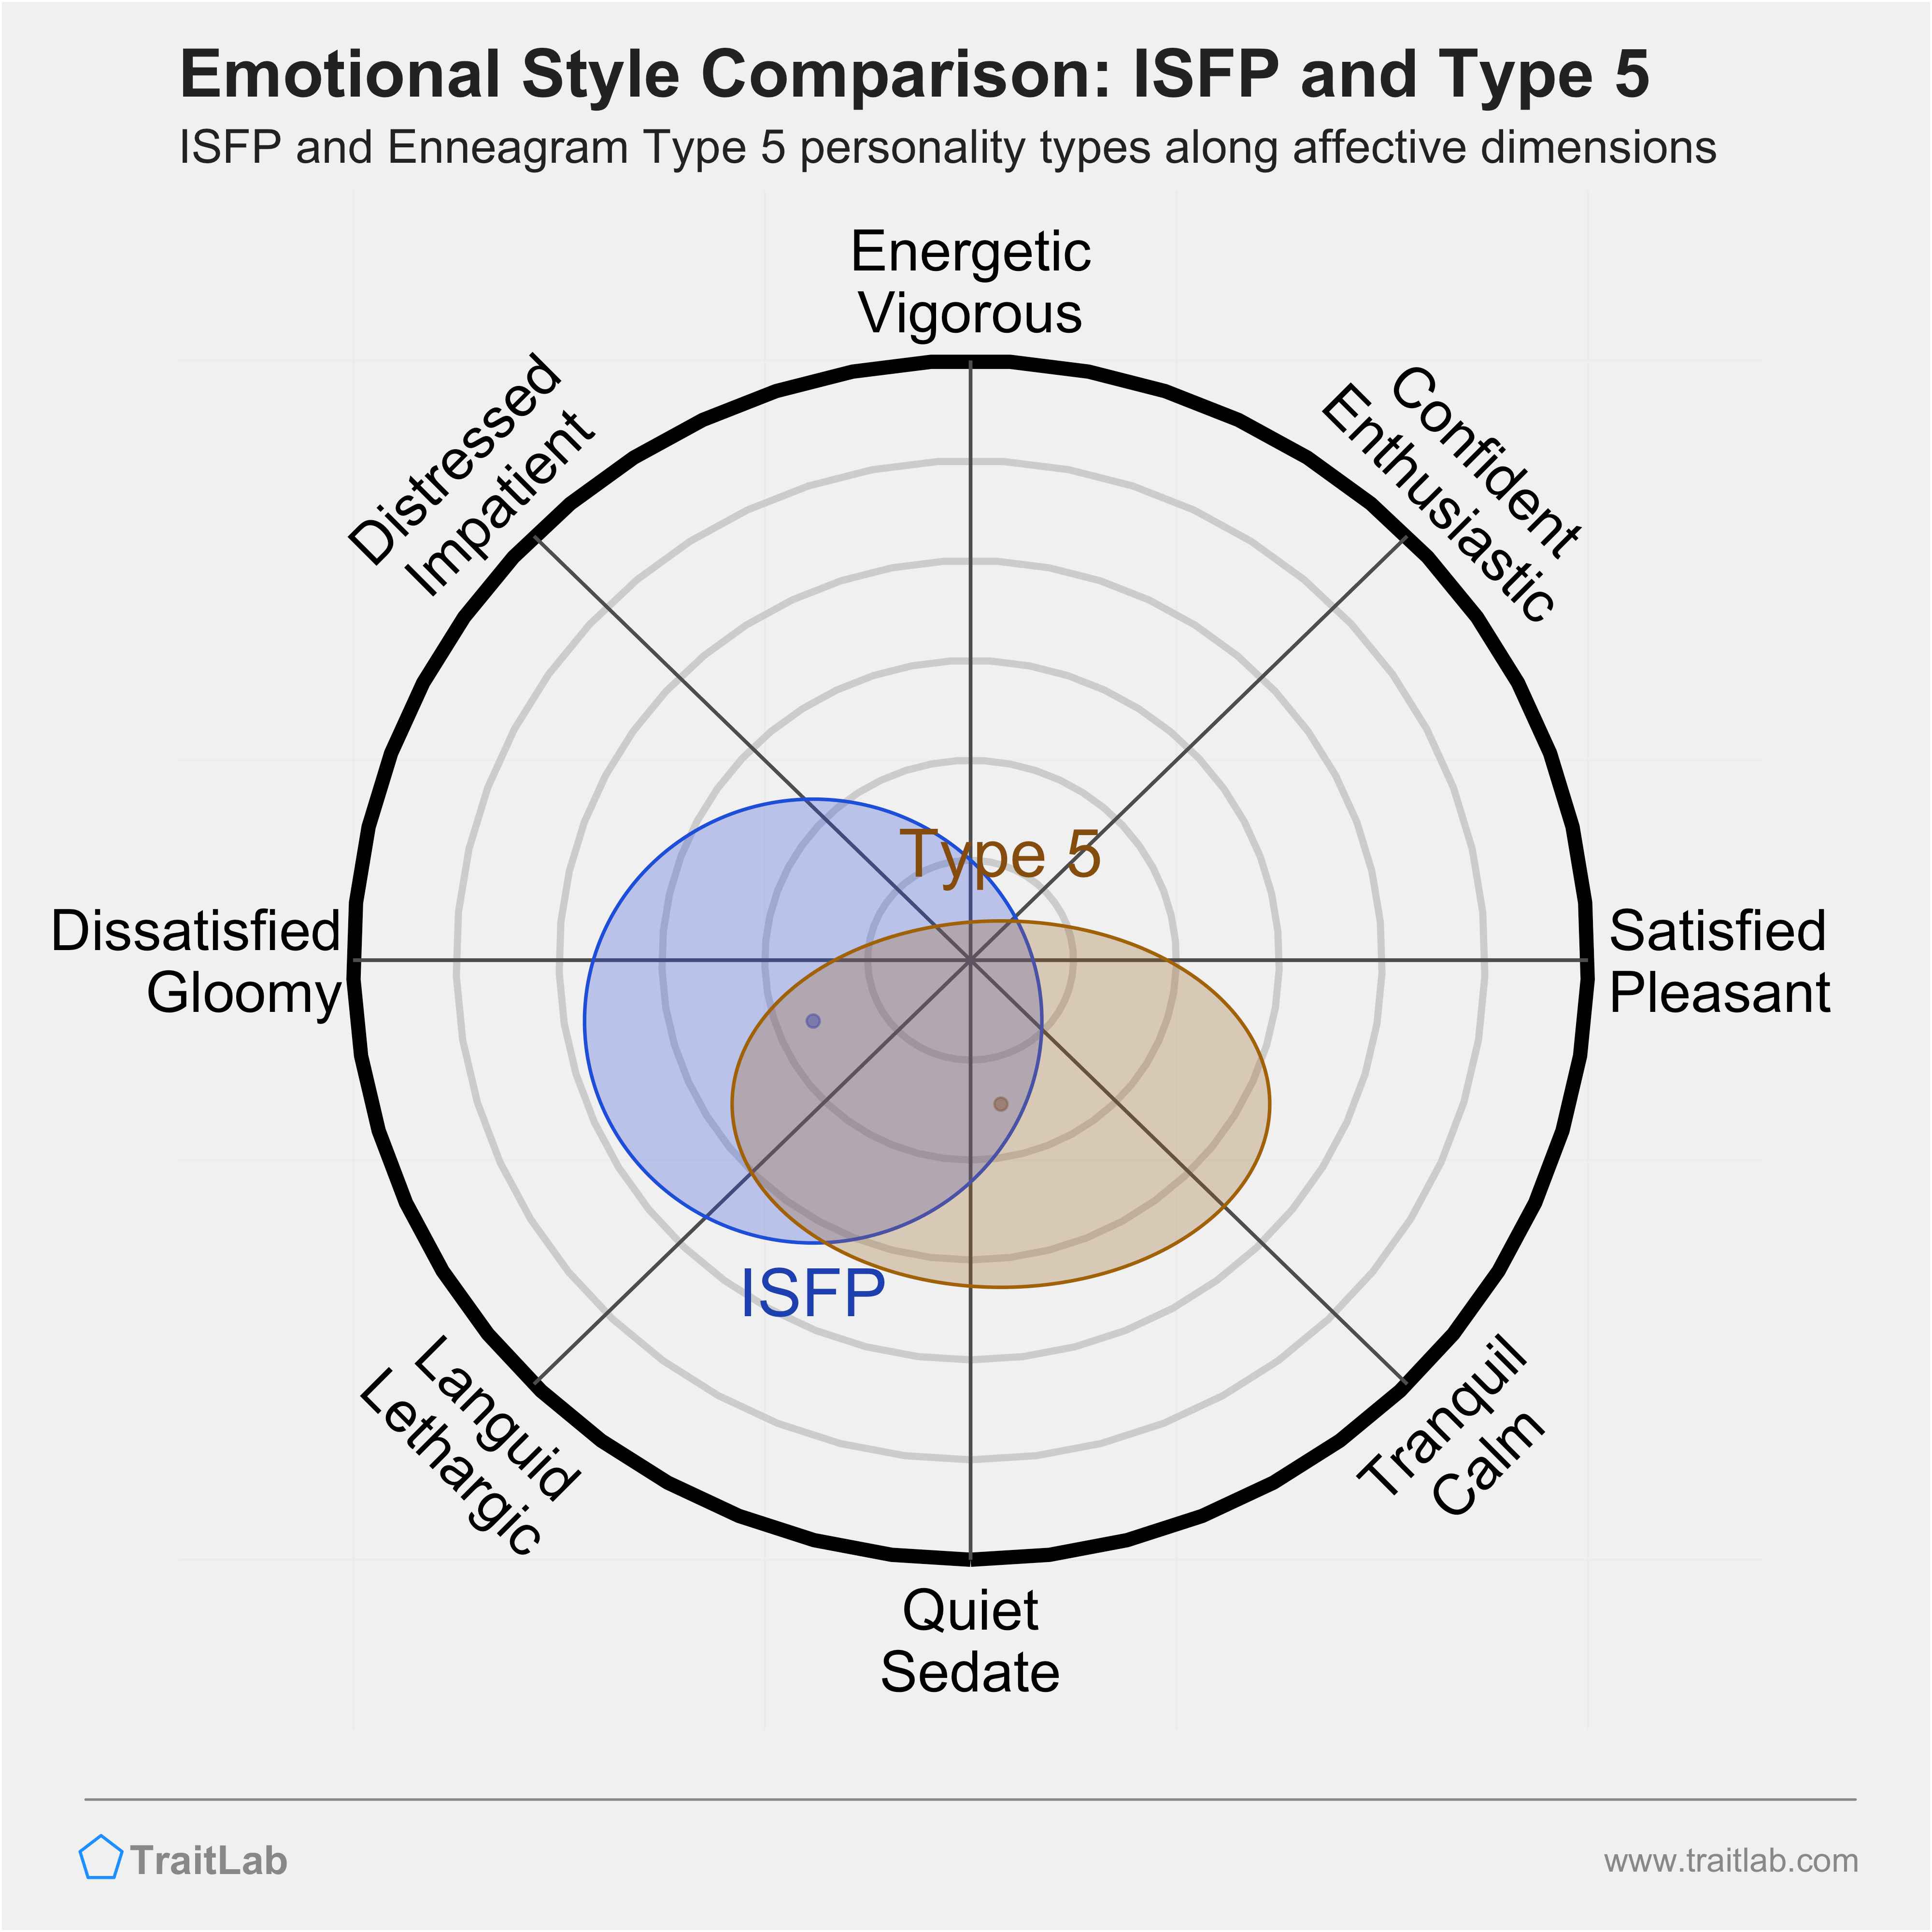 ISFP and Type 5 comparison across emotional (affective) dimensions